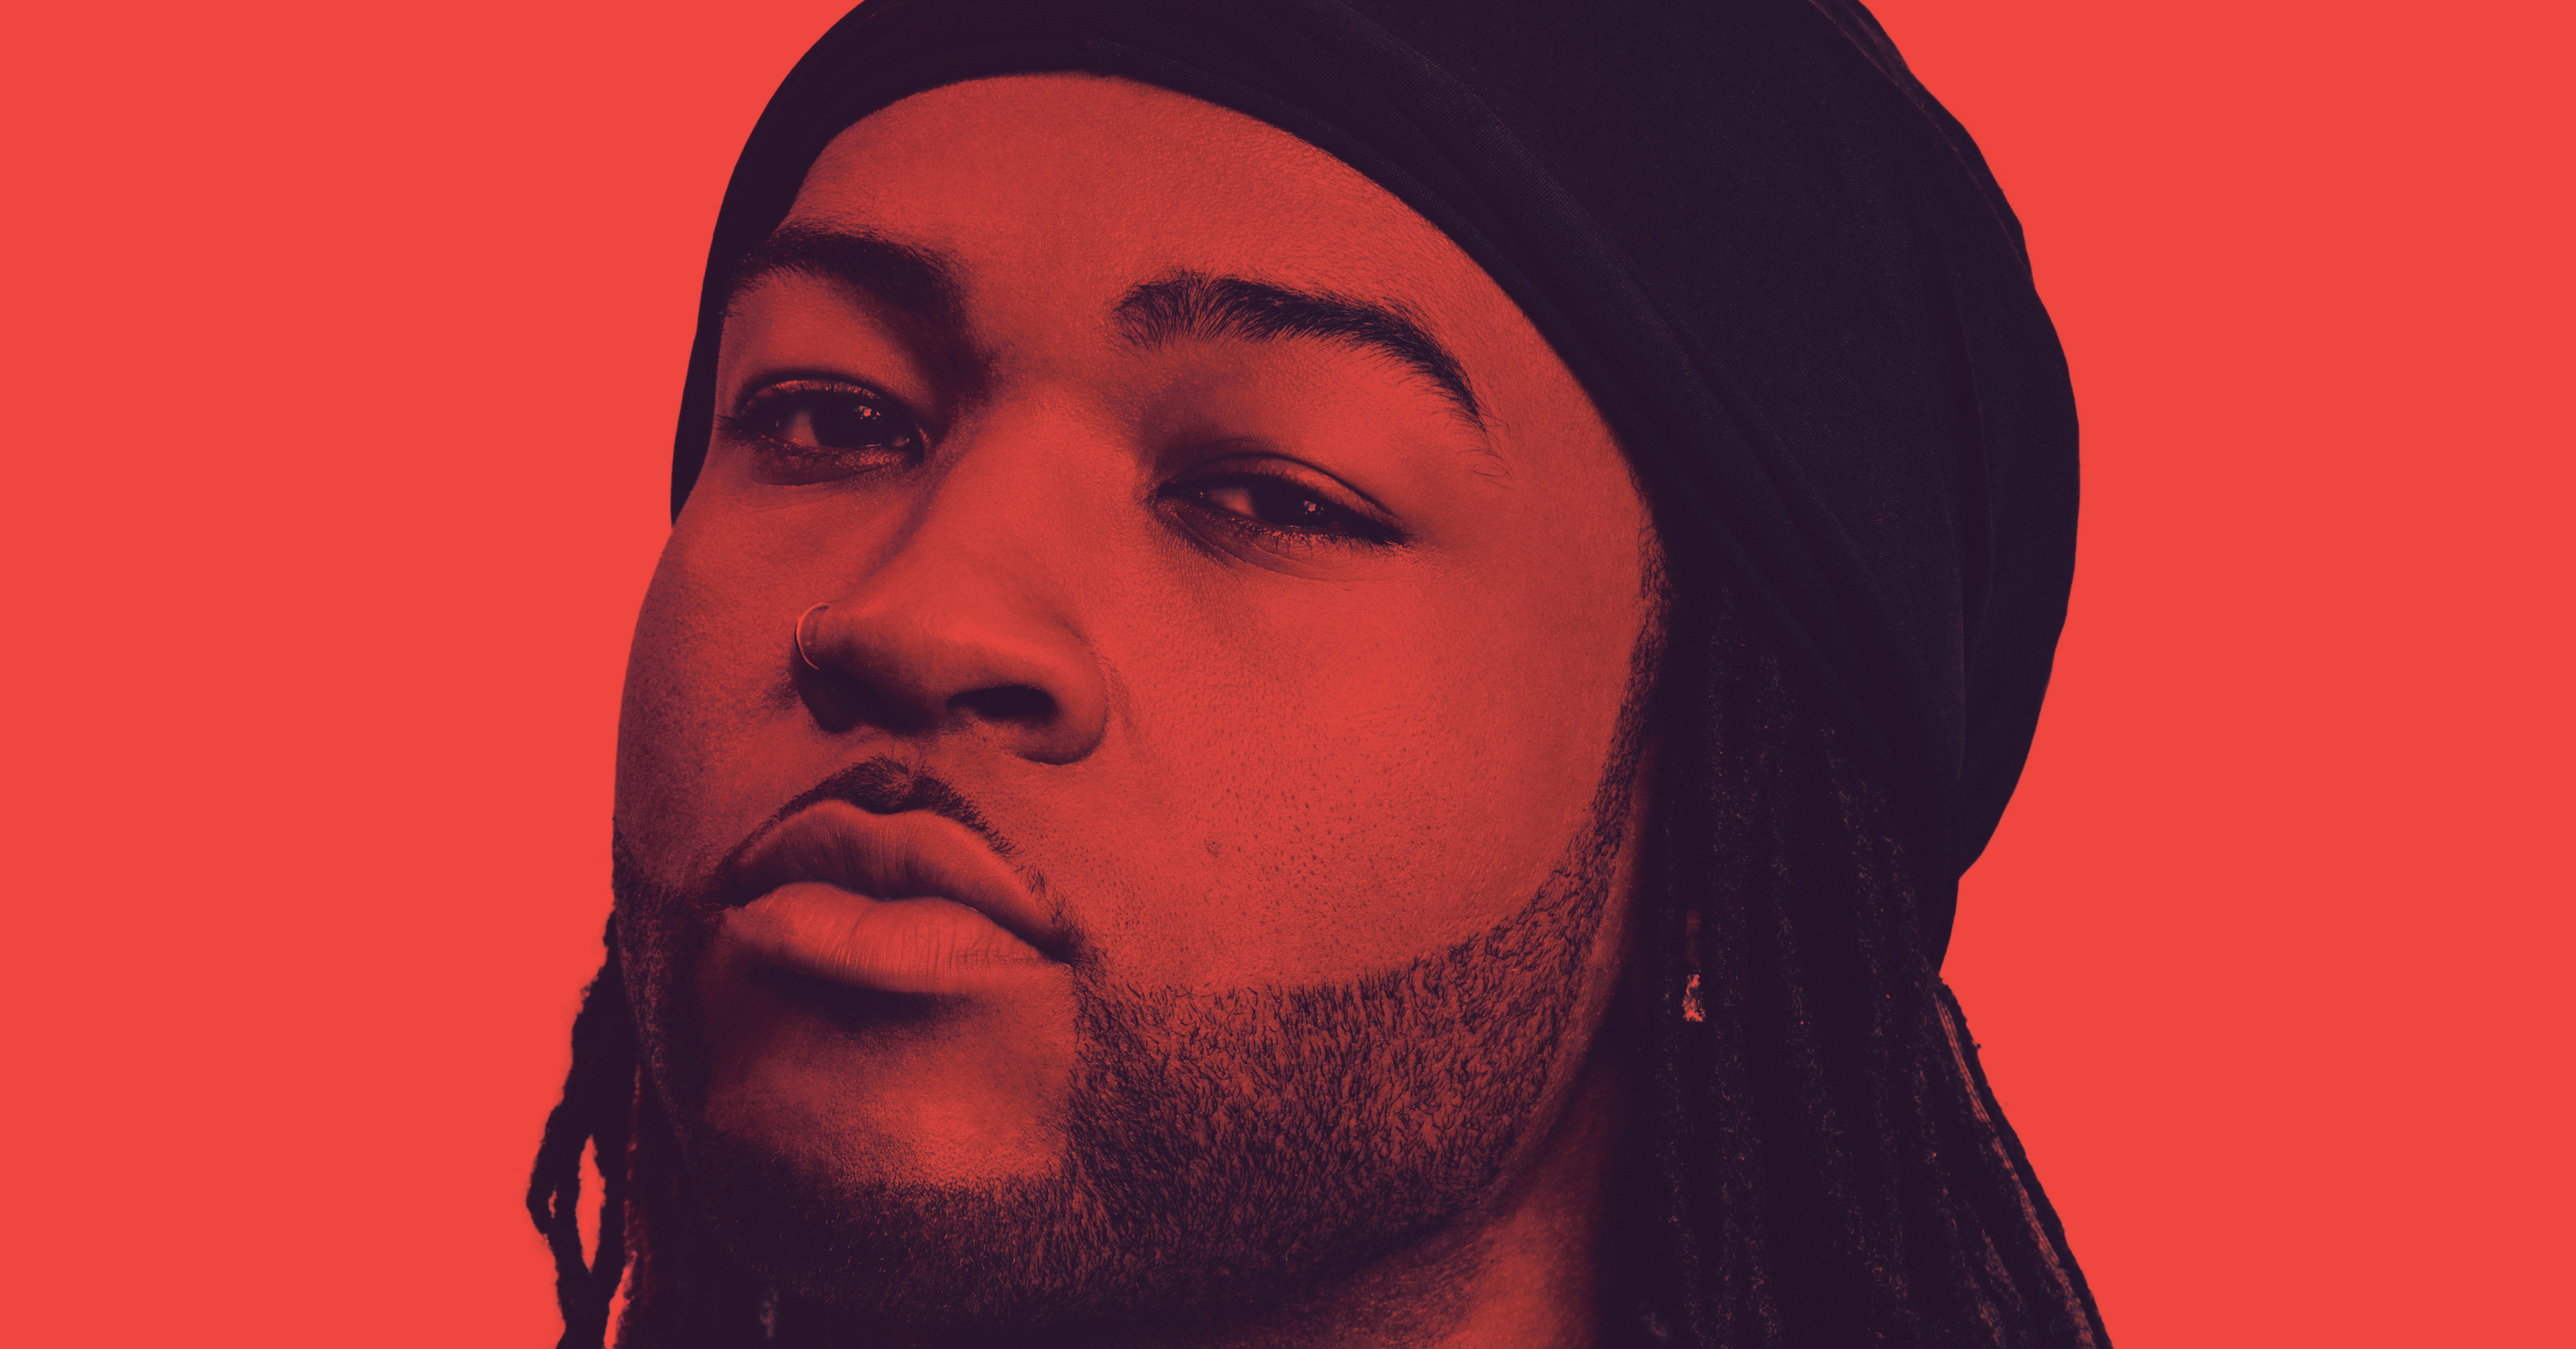 Partynextdoor Speaks About His Music For The First Time